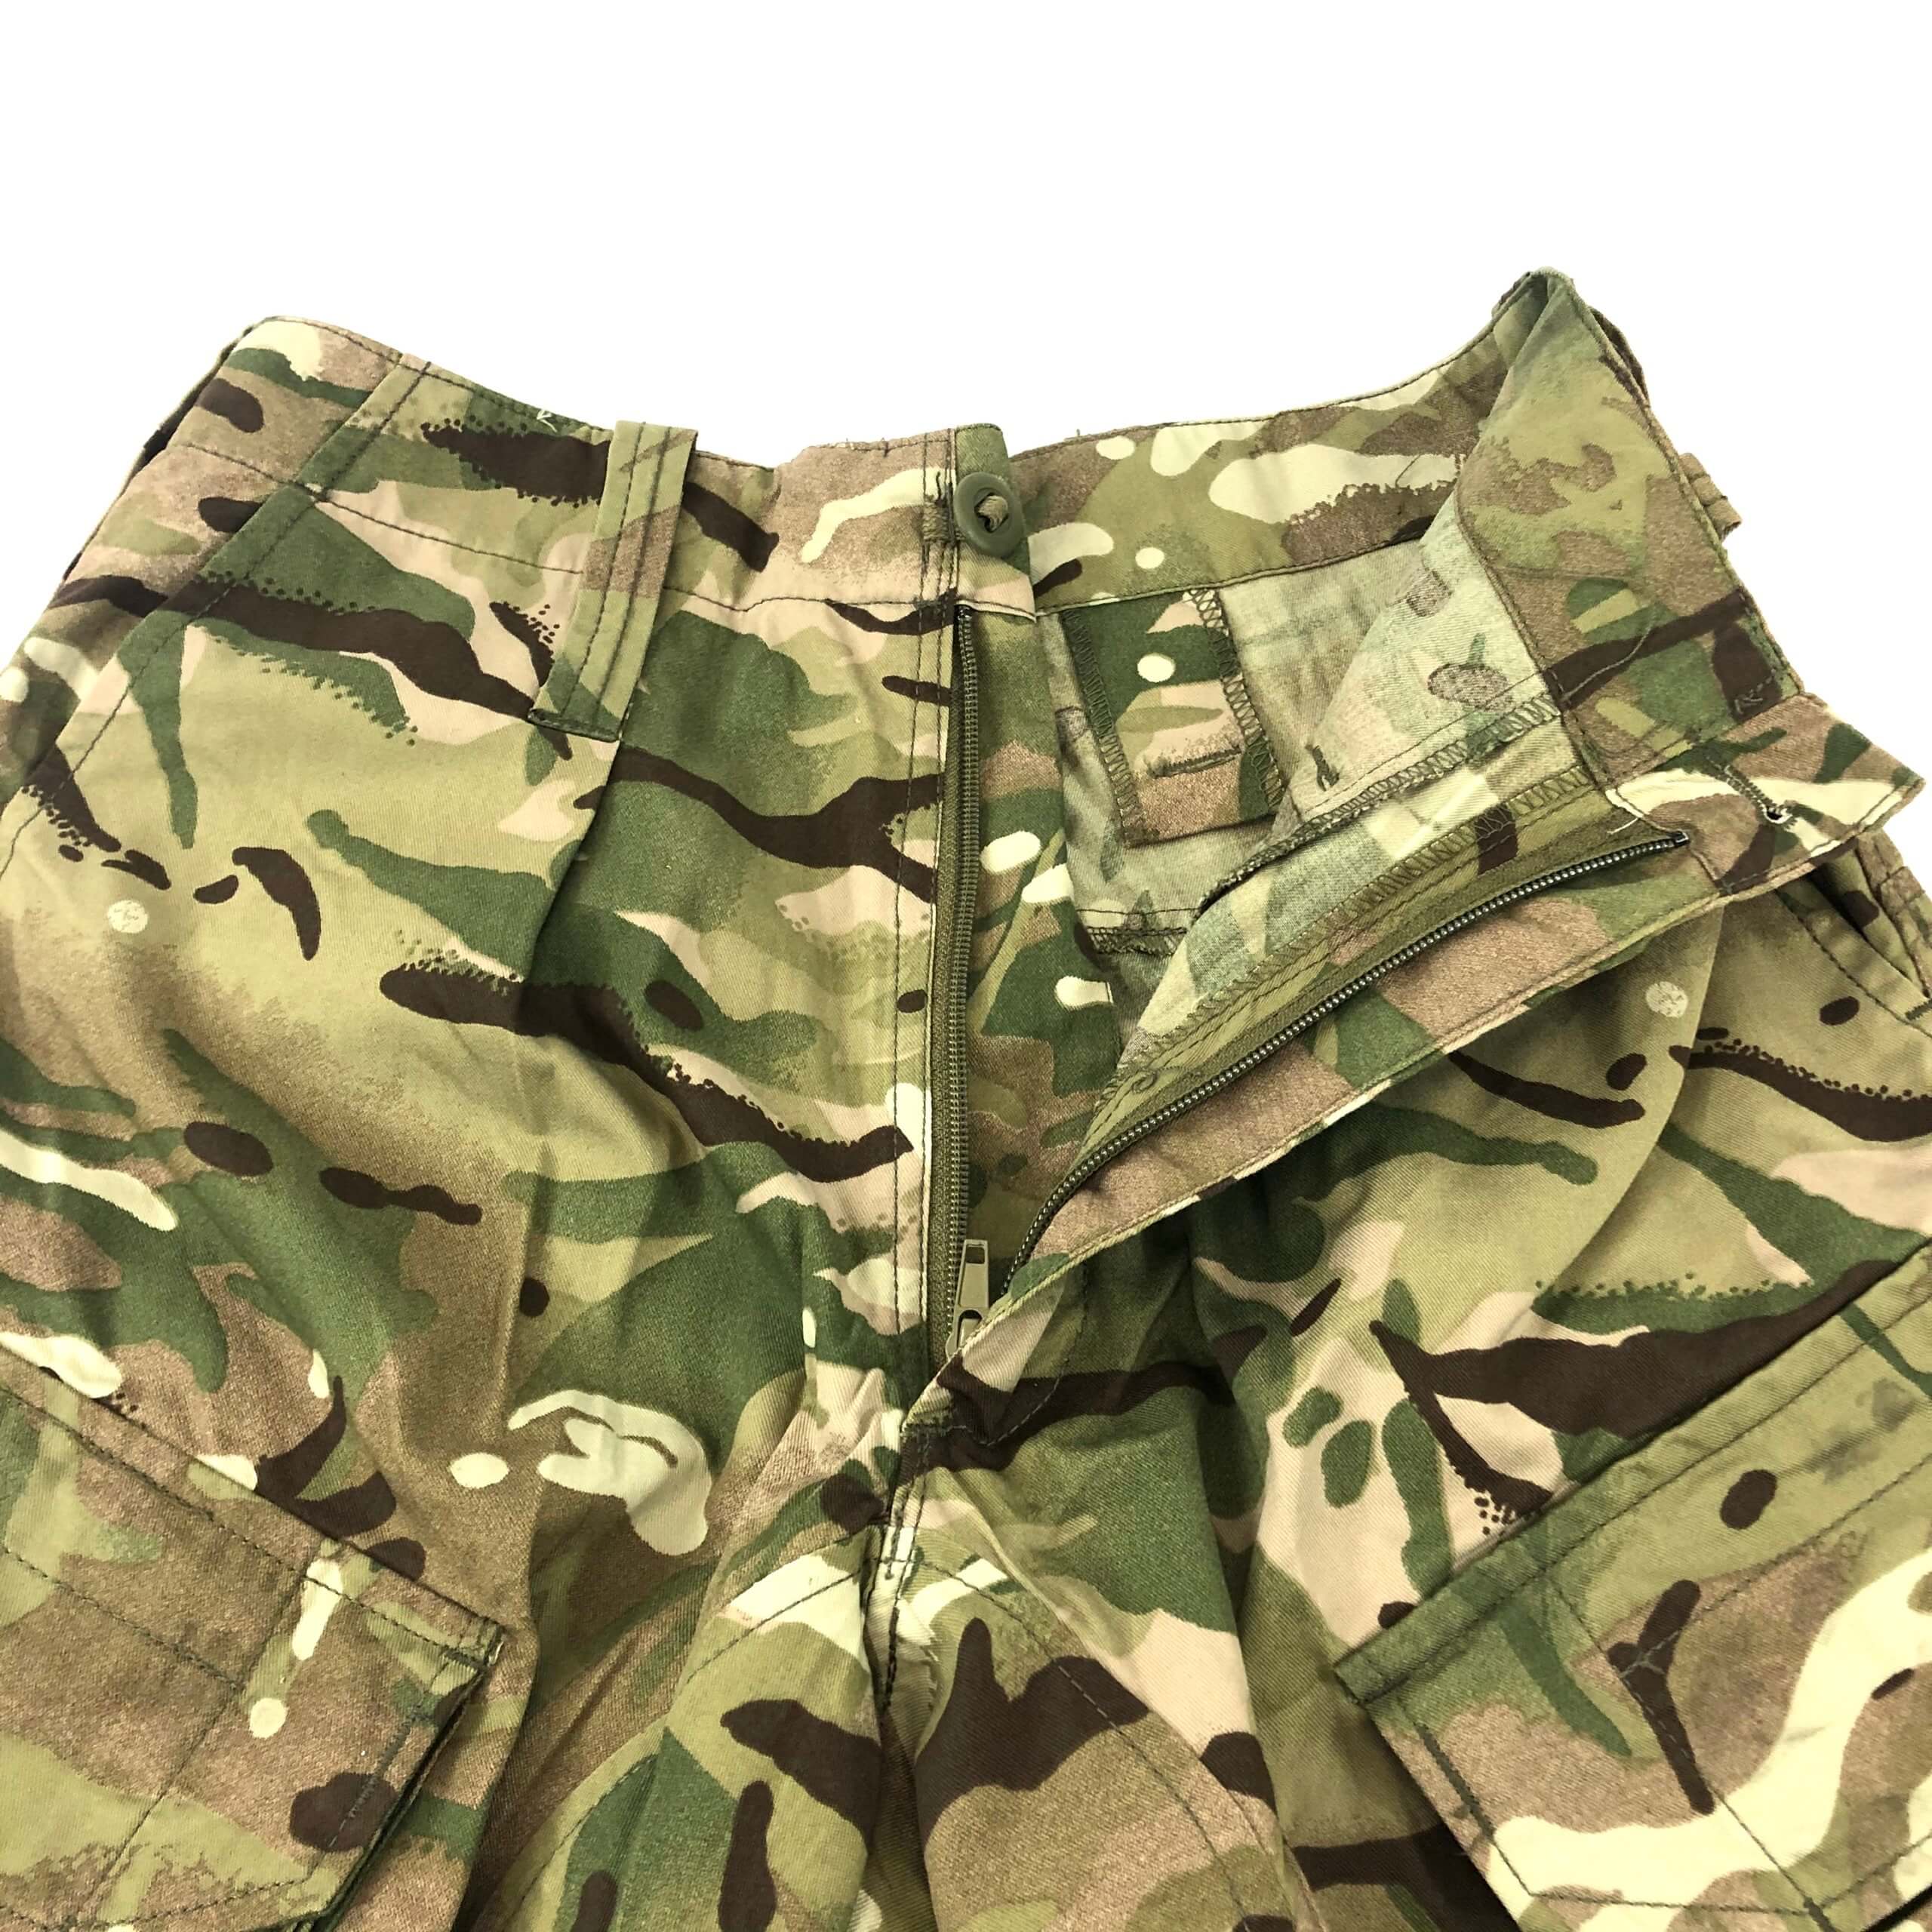 ARMY CARGO CAMOFLAGE COMBAT MILITARY TROUSERS/PANTS 30"-56" WAIST 32" & 30" LEG